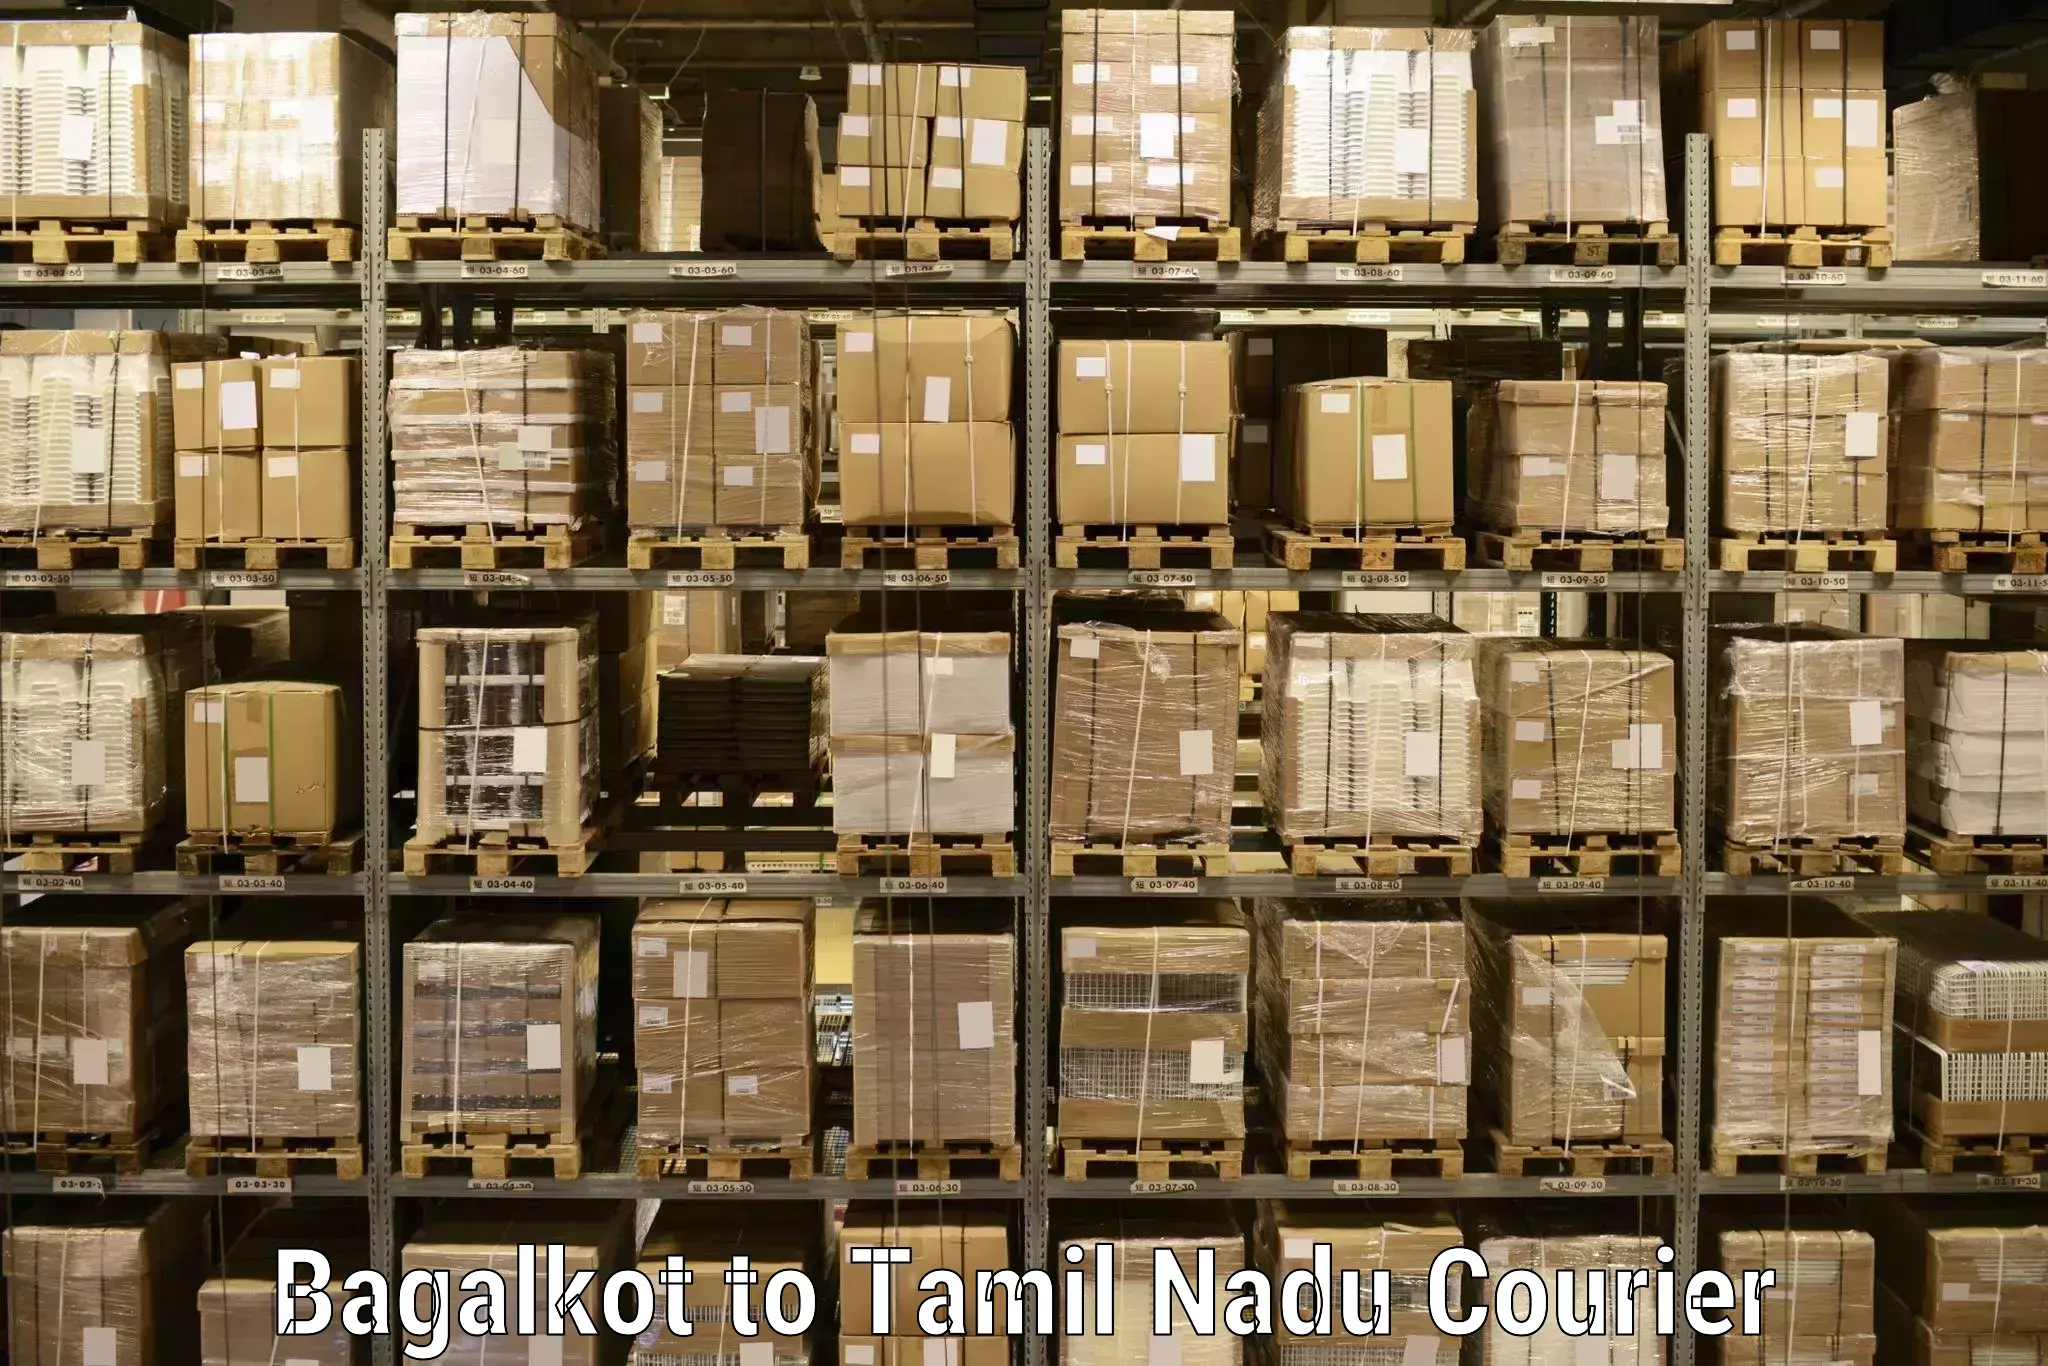 Comprehensive shipping network Bagalkot to Tuticorin